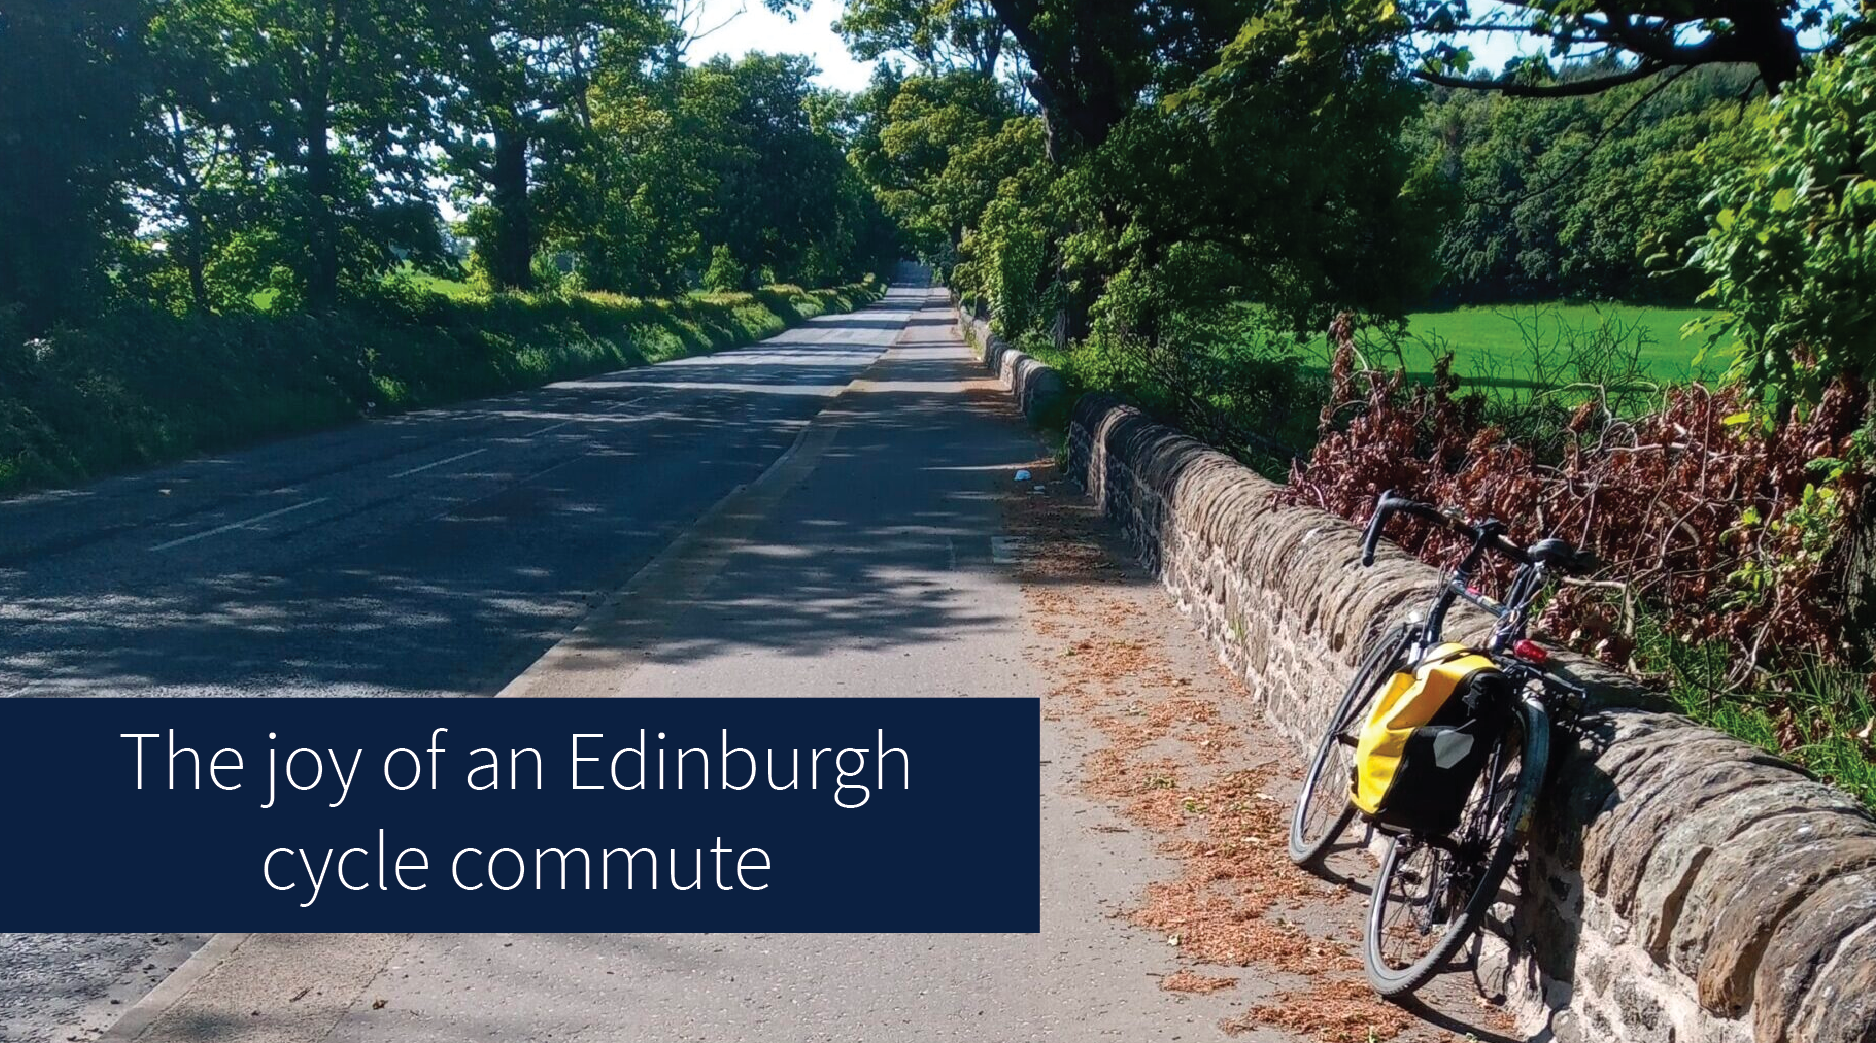 "The joy of an Edinburgh cycle commute" Bike leans against stone wall alongside road lined with trees.